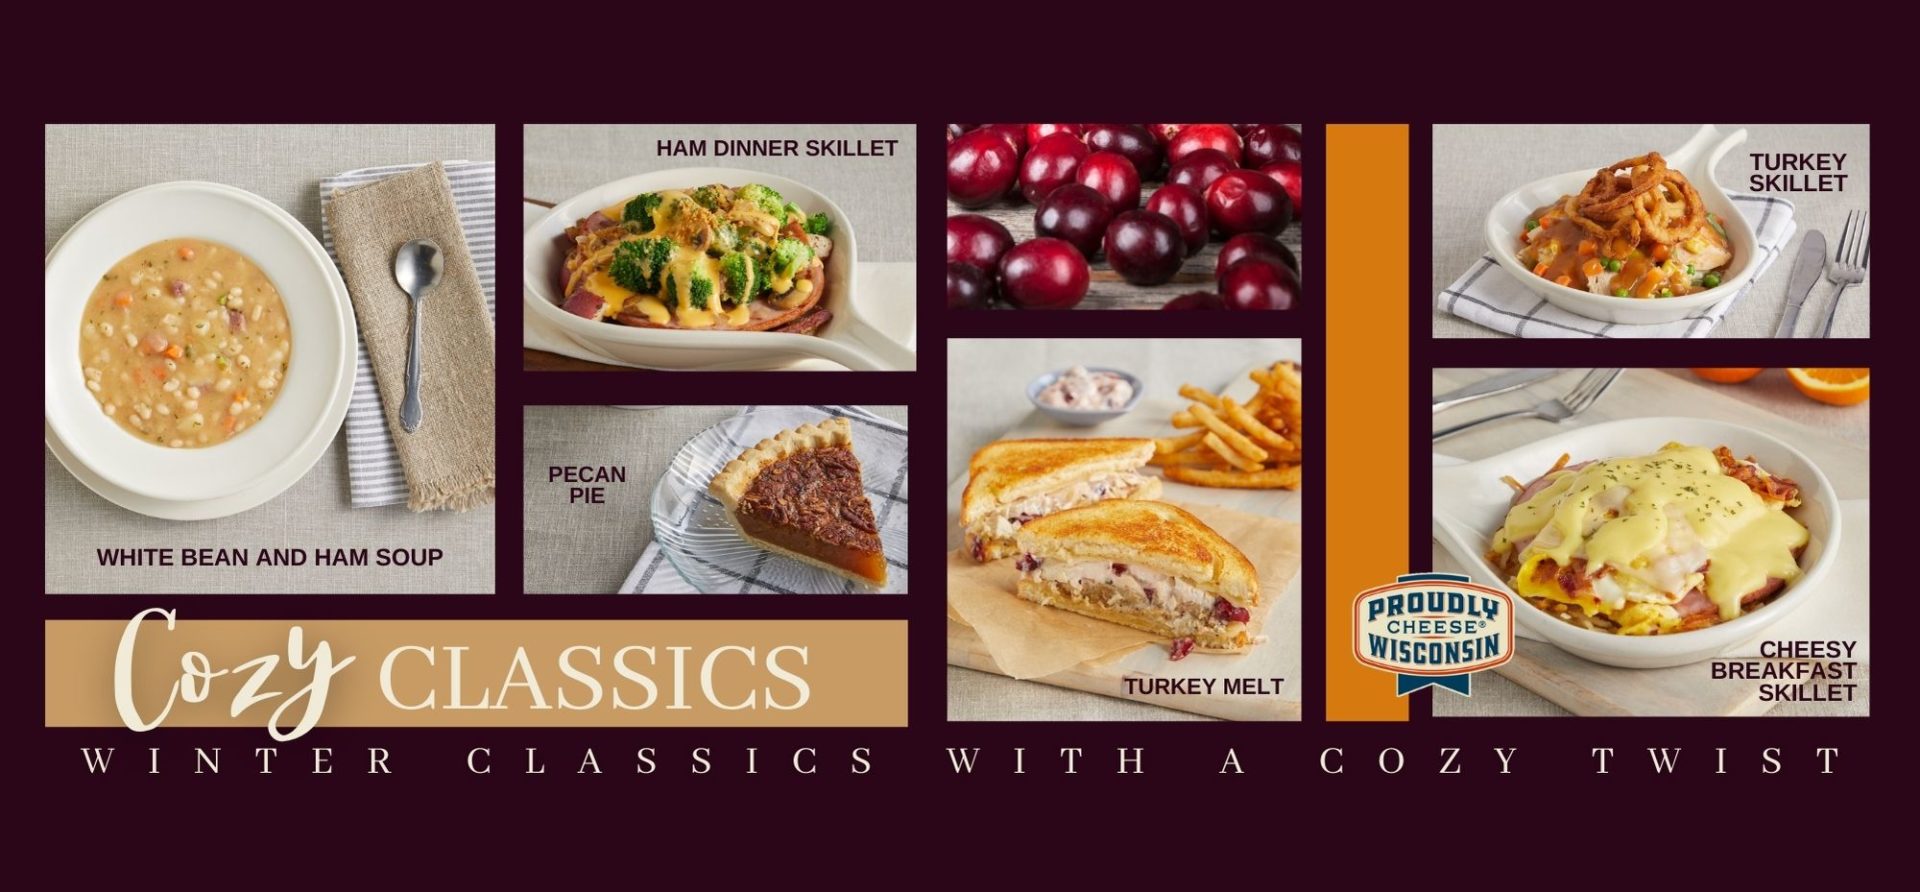 Country Kitchen Ad for New Breakfast Melt and Tot Breakfast Wrap